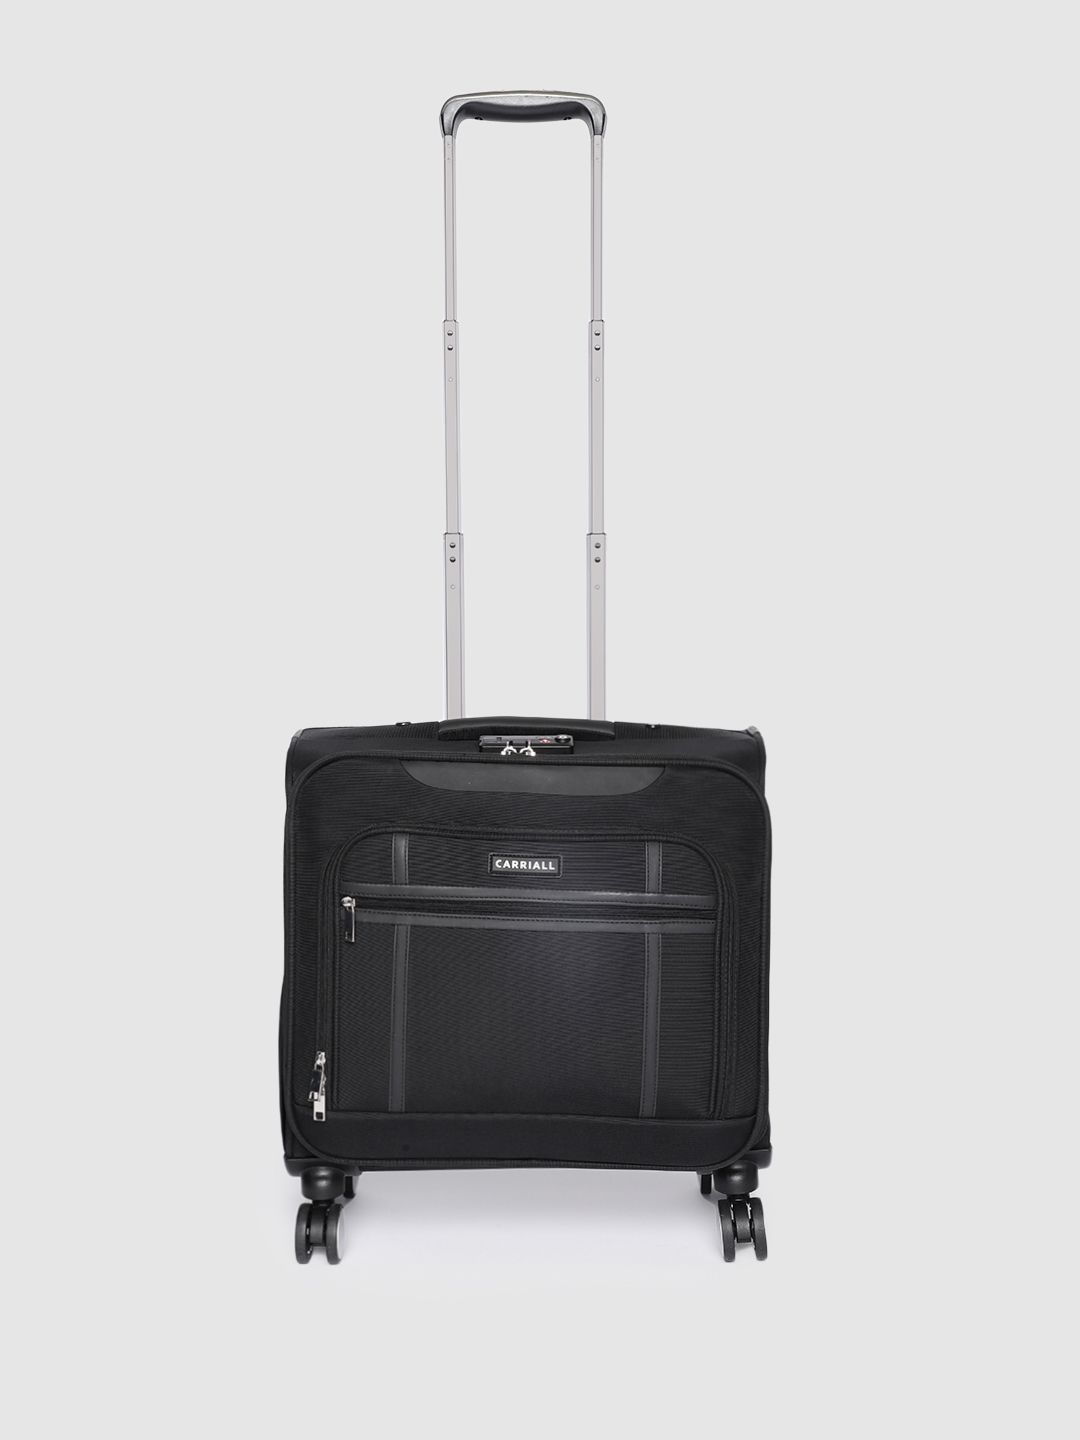 CARRIALL Black Solid Laptop Roller Case Cabin Trolley Bag Price in India